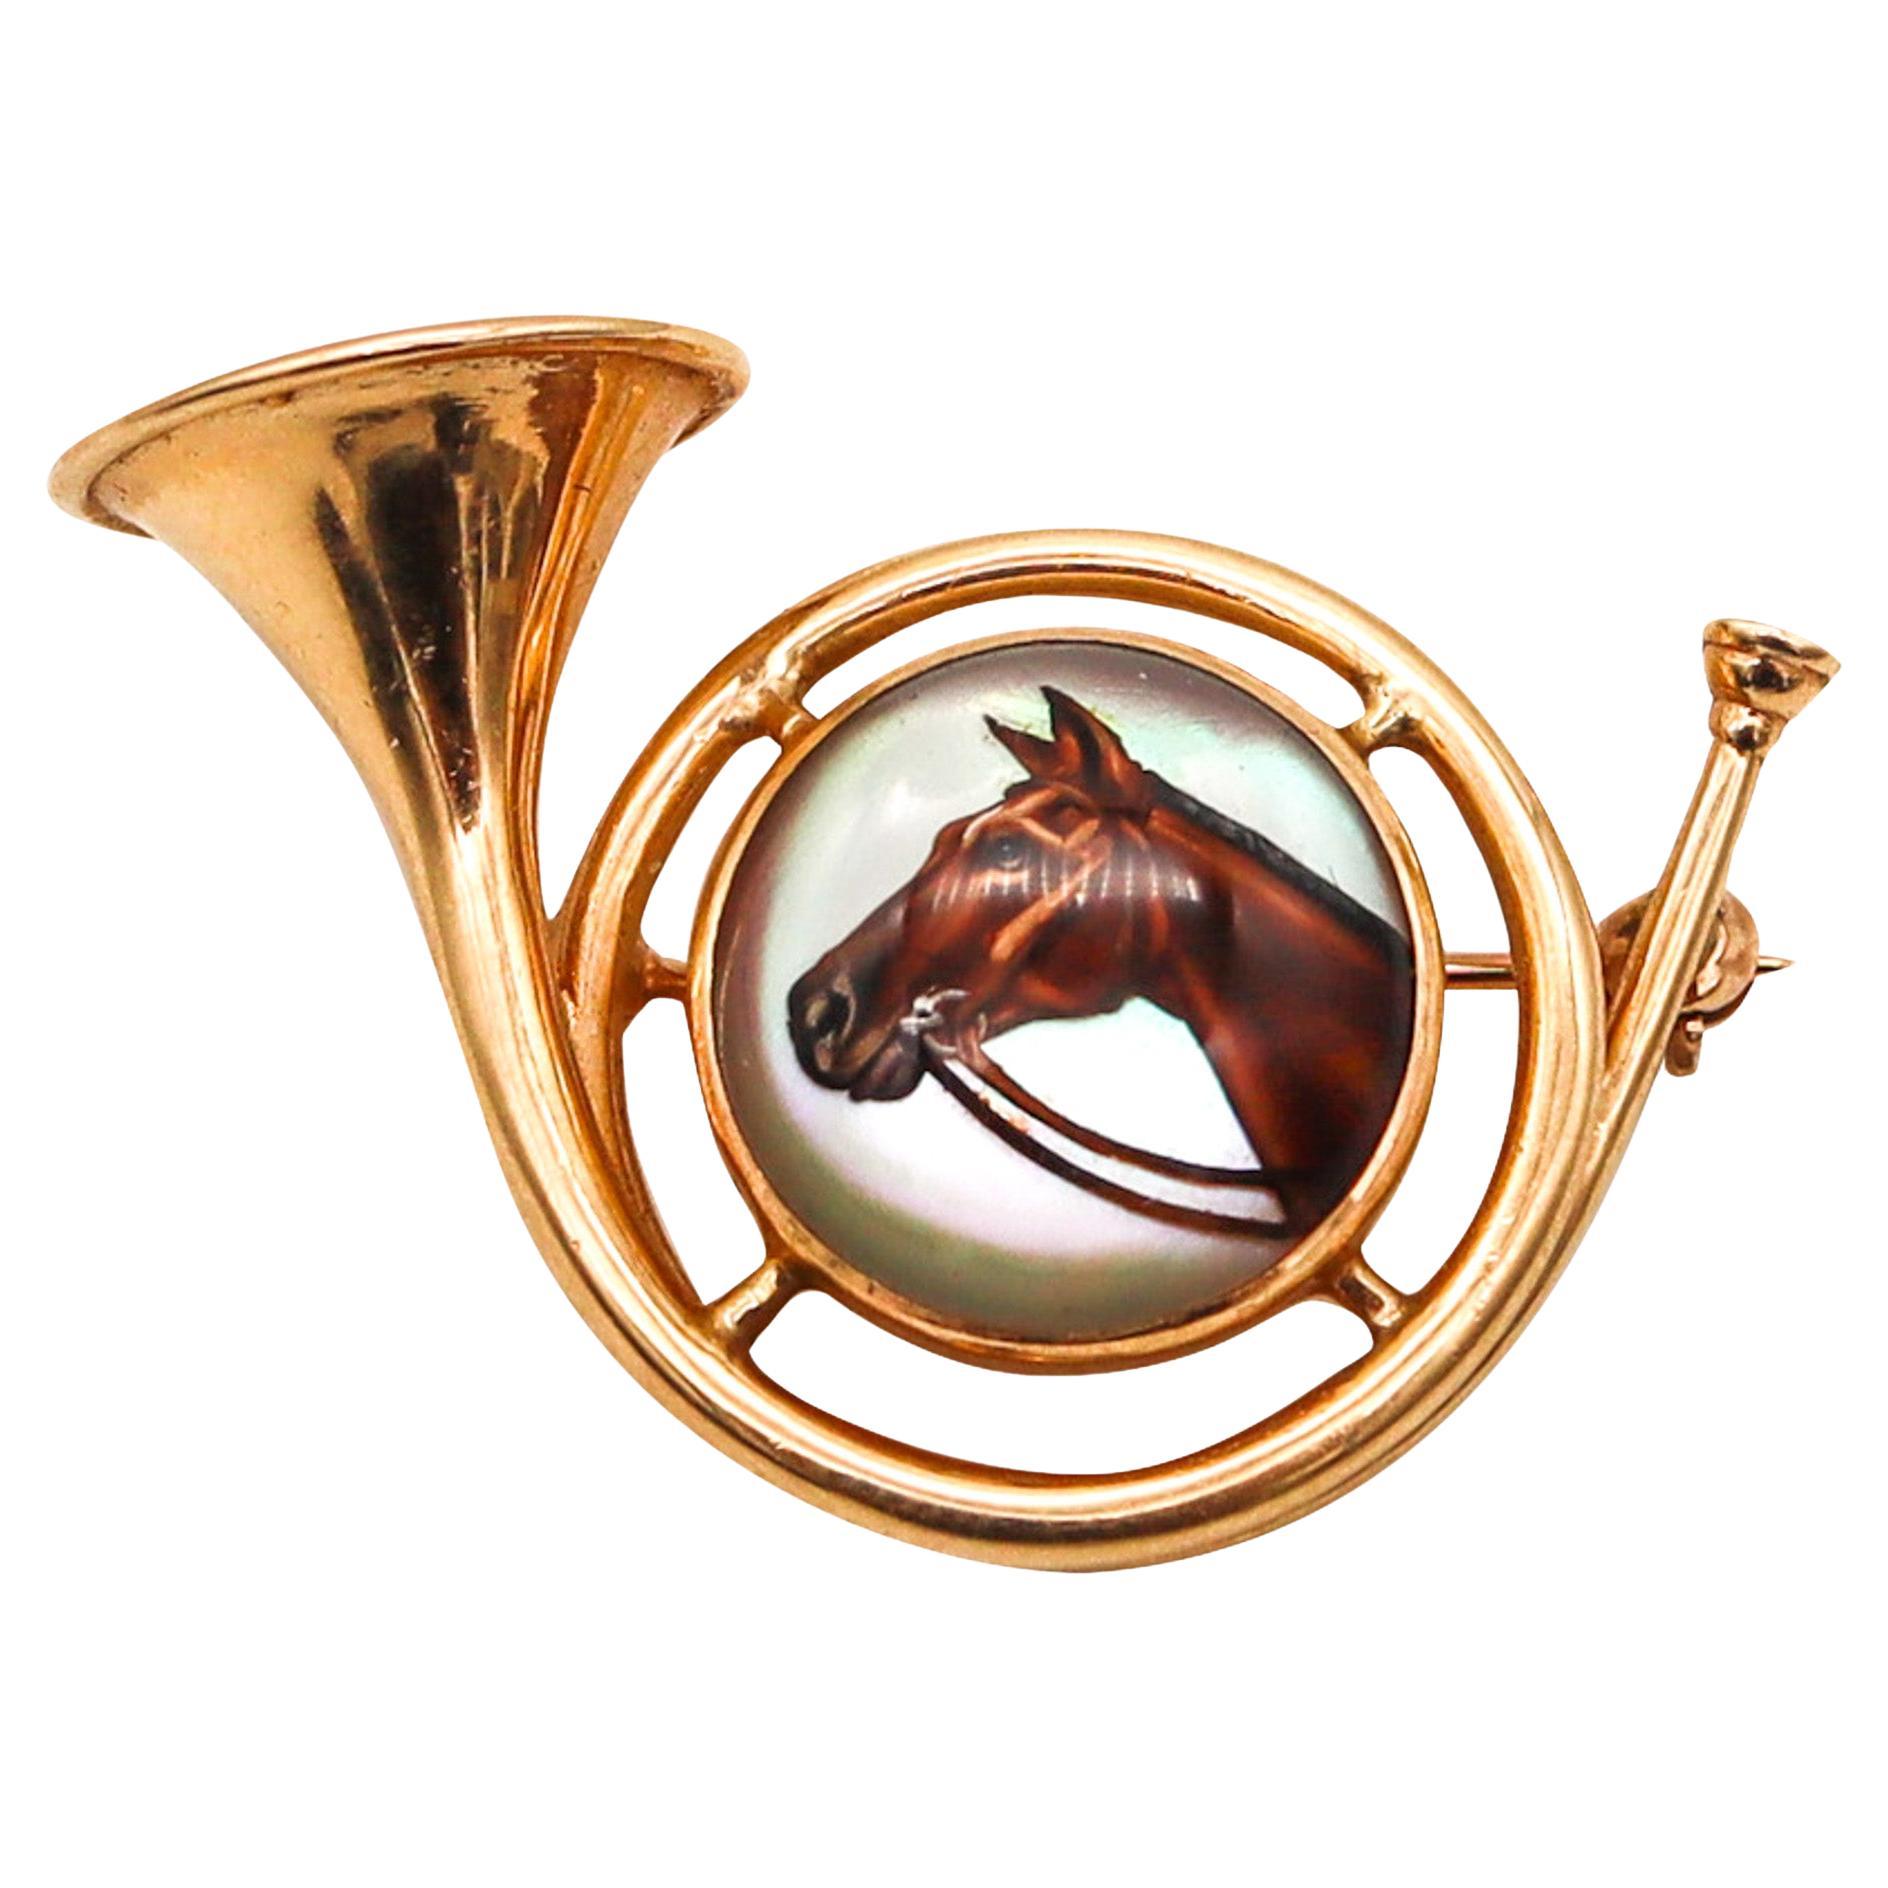 Henry Blank & Co. 1925 Essex Glass Hunting Trumpet Horse Pin In 14Kt Yellow Gold